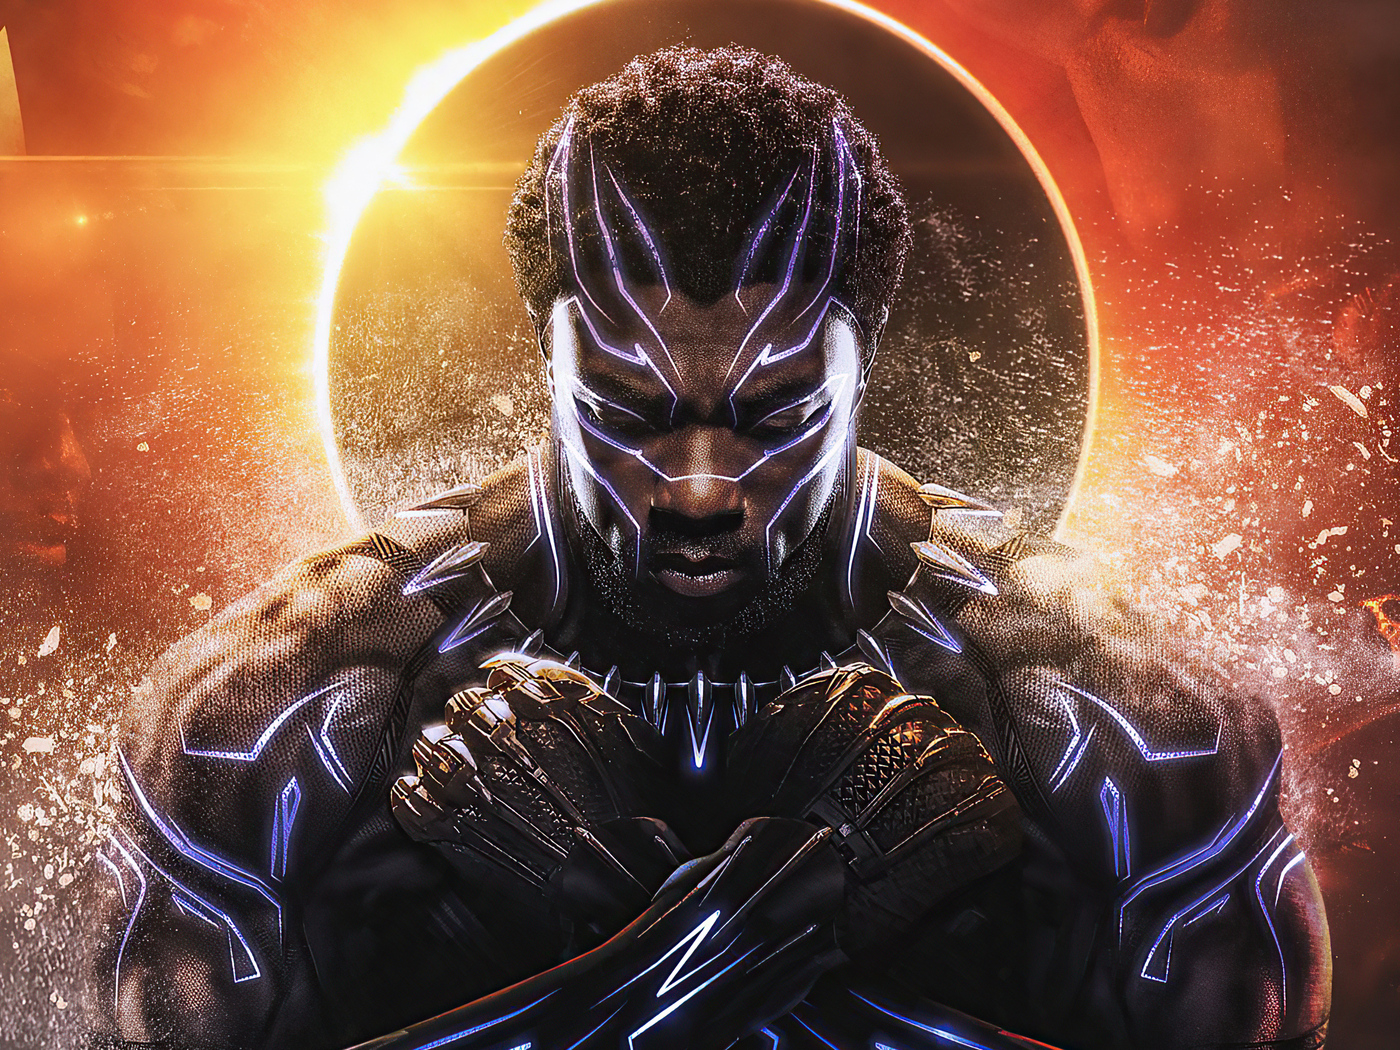 Black Panther: Wakanda Forever for windows download free